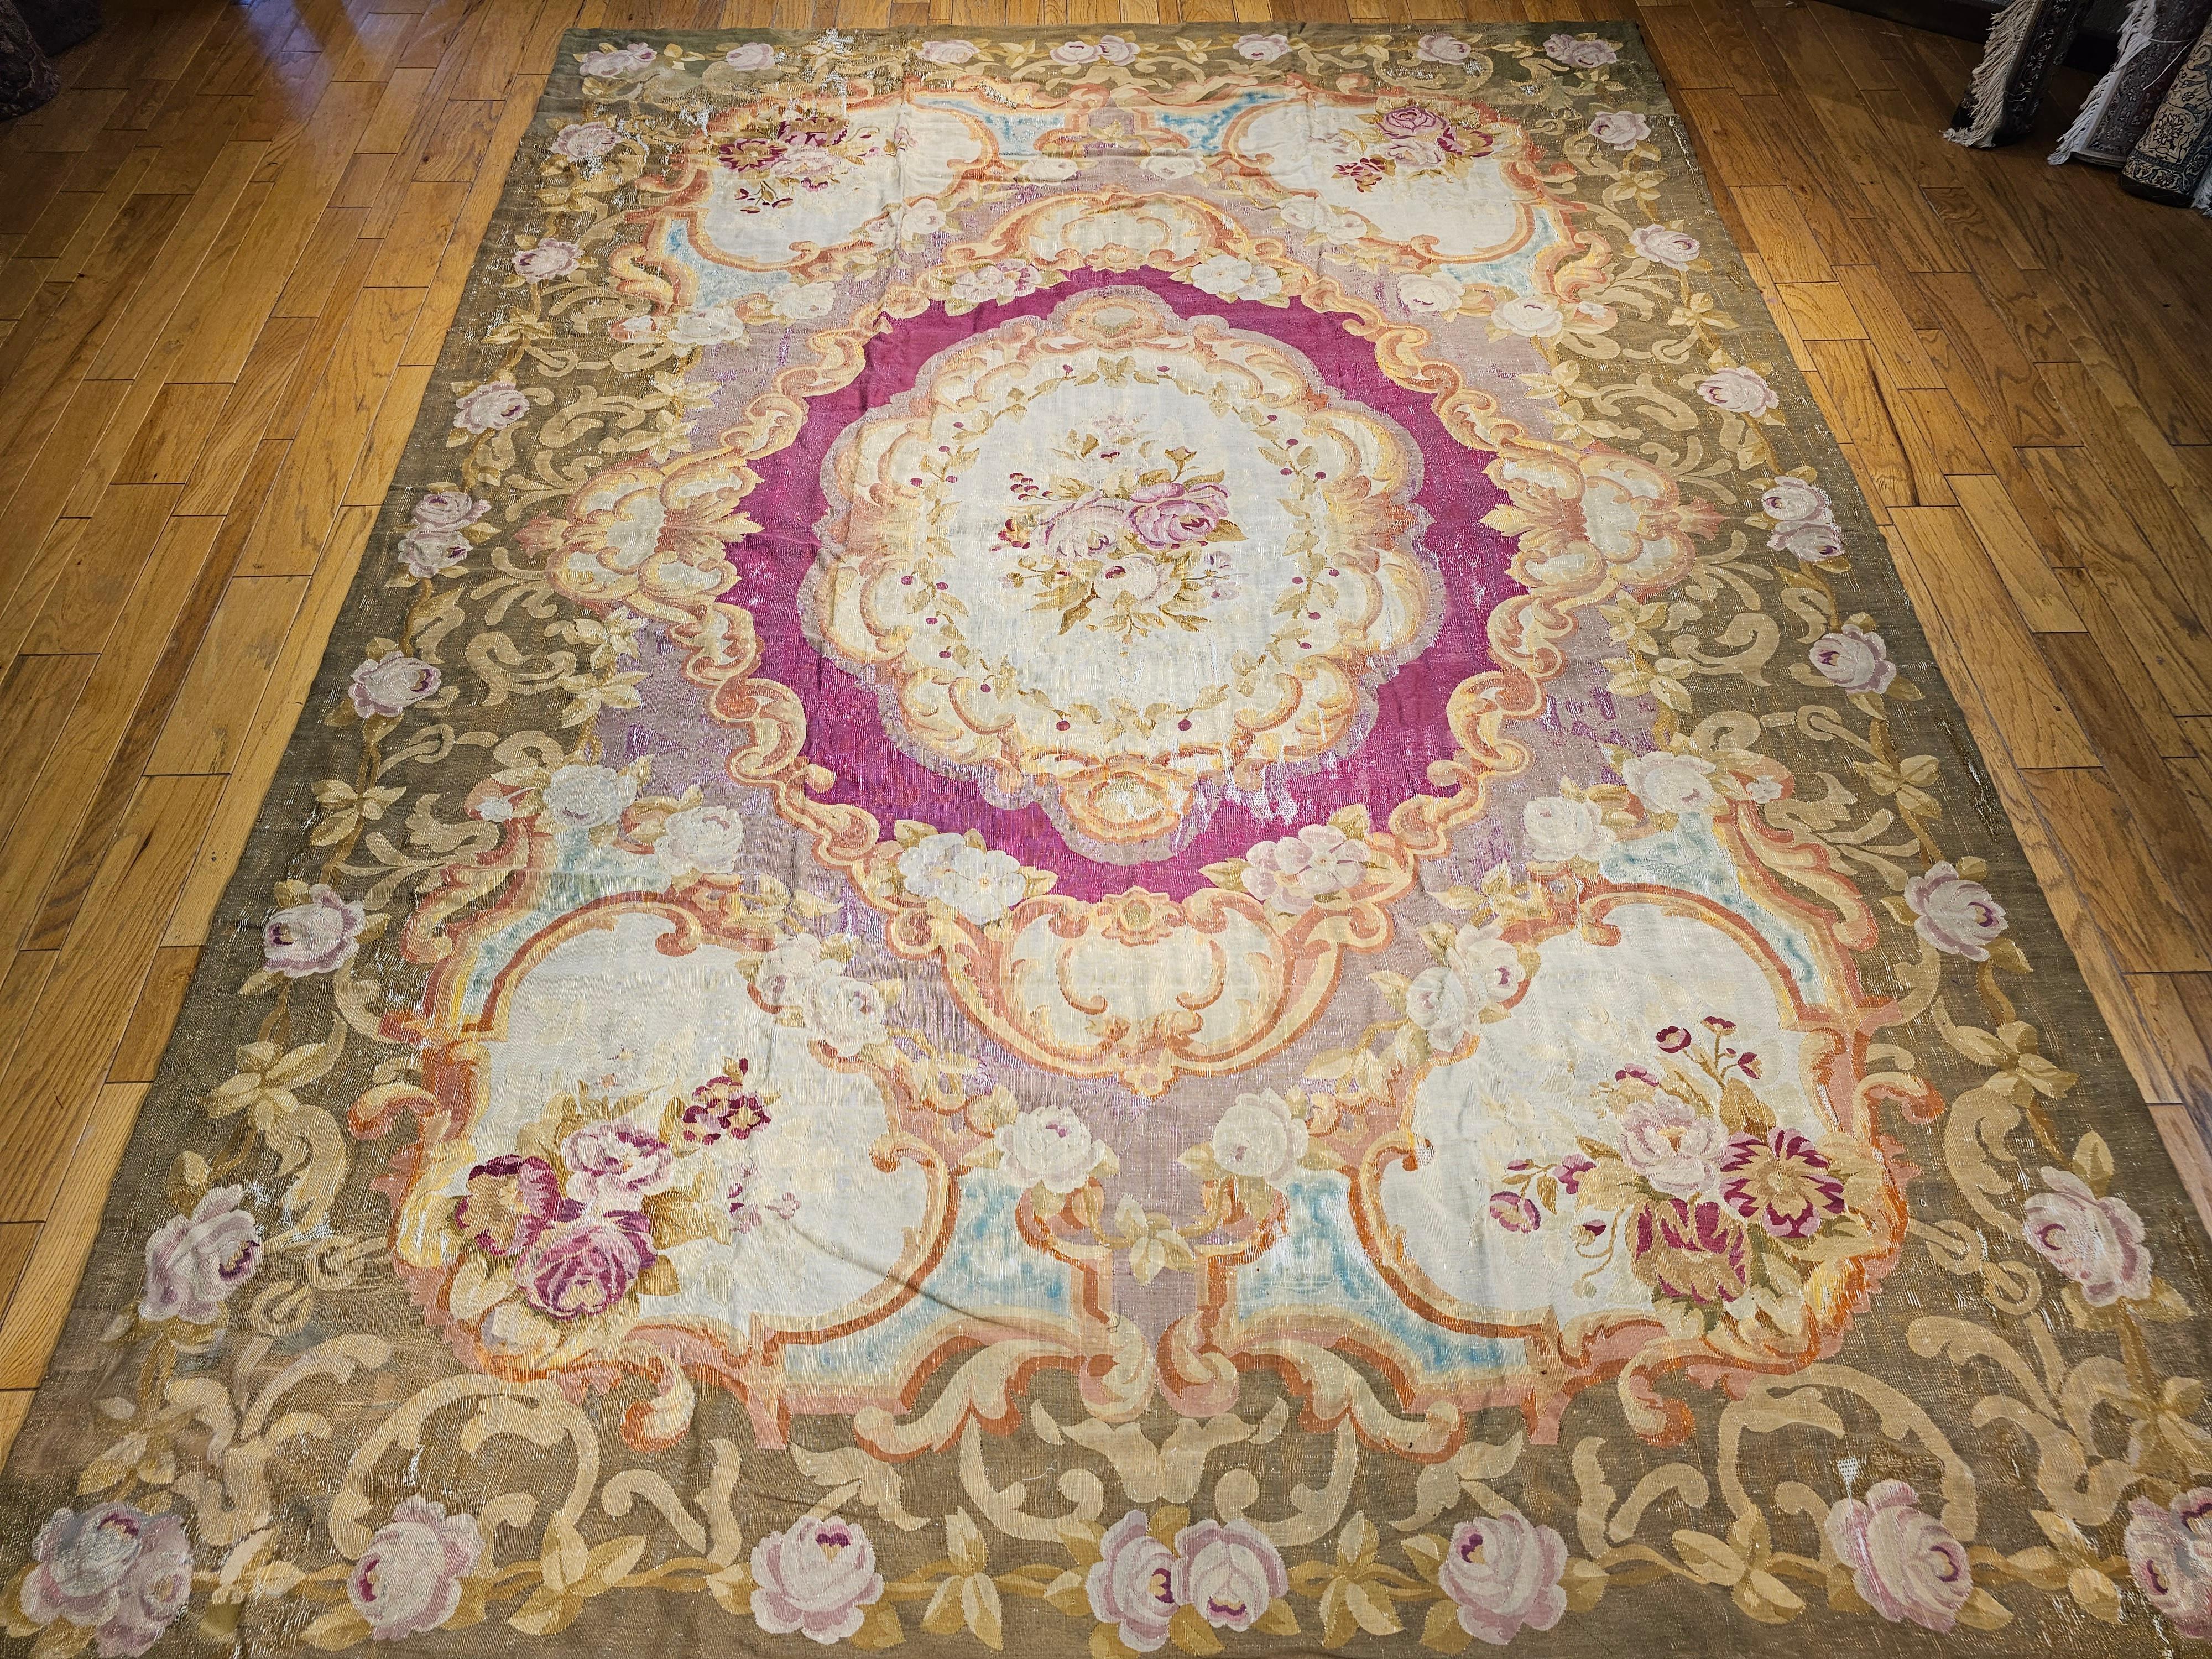  The Louis Philippe Aubusson carpet from the mid1800s (circa 1840s) has one of the most spectacular design and color combinations. A central oval floral medallion flanked by sprays on the dusty rose field is within an olive green vinery border.The